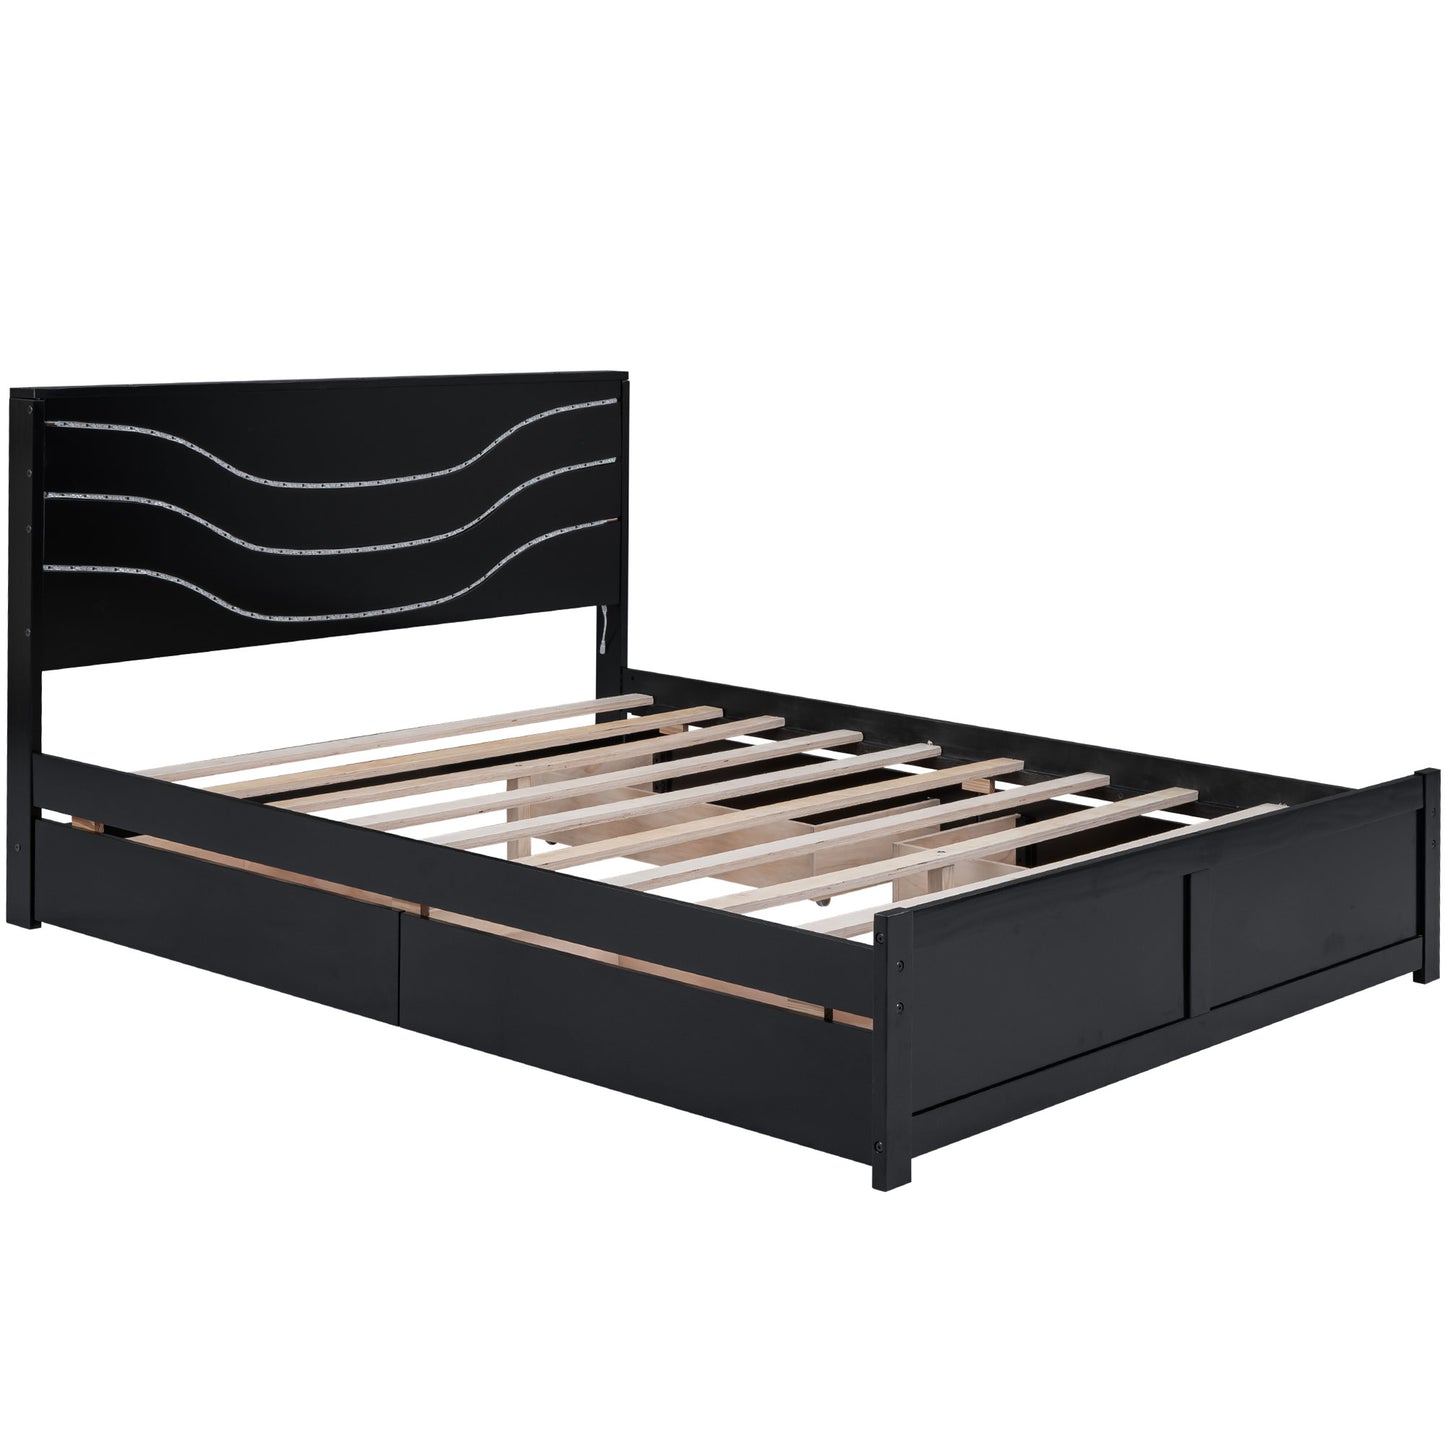 Queen Size Wood Storage Platform Bed with LED and 4 Drawers, White